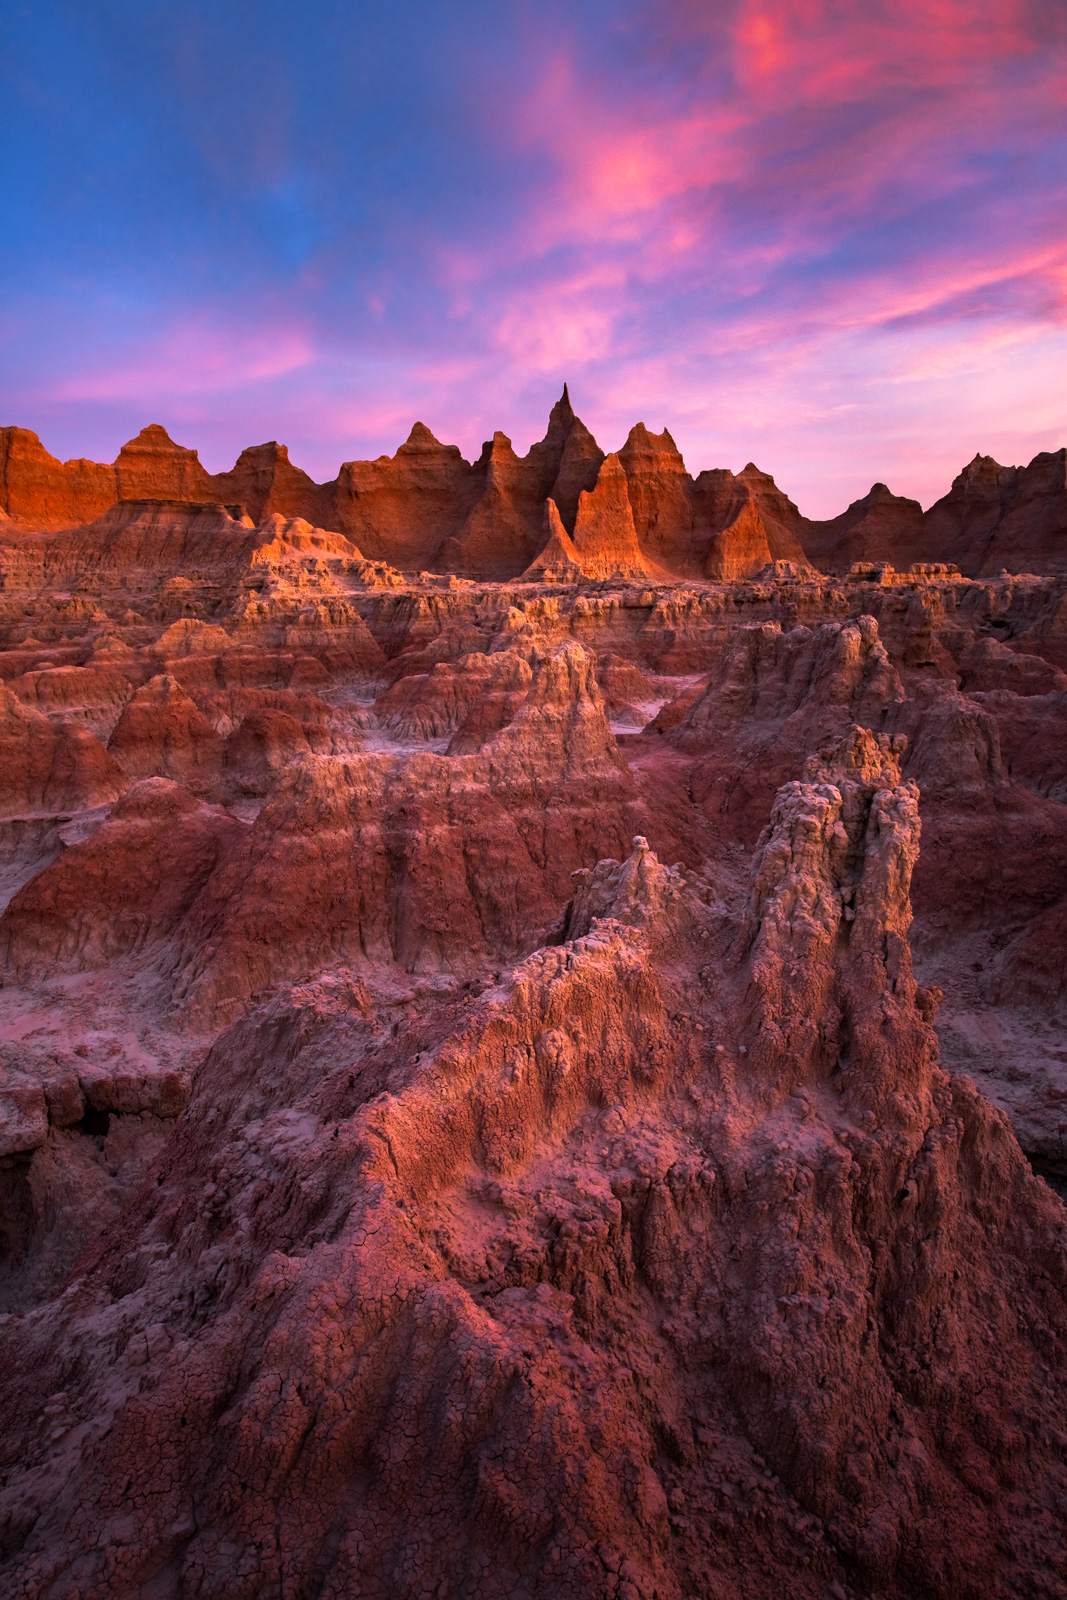 The jagged peaks of the Badlands rise from the prairie like an unpassable wall of stone and rock illuminated by the rising sun...